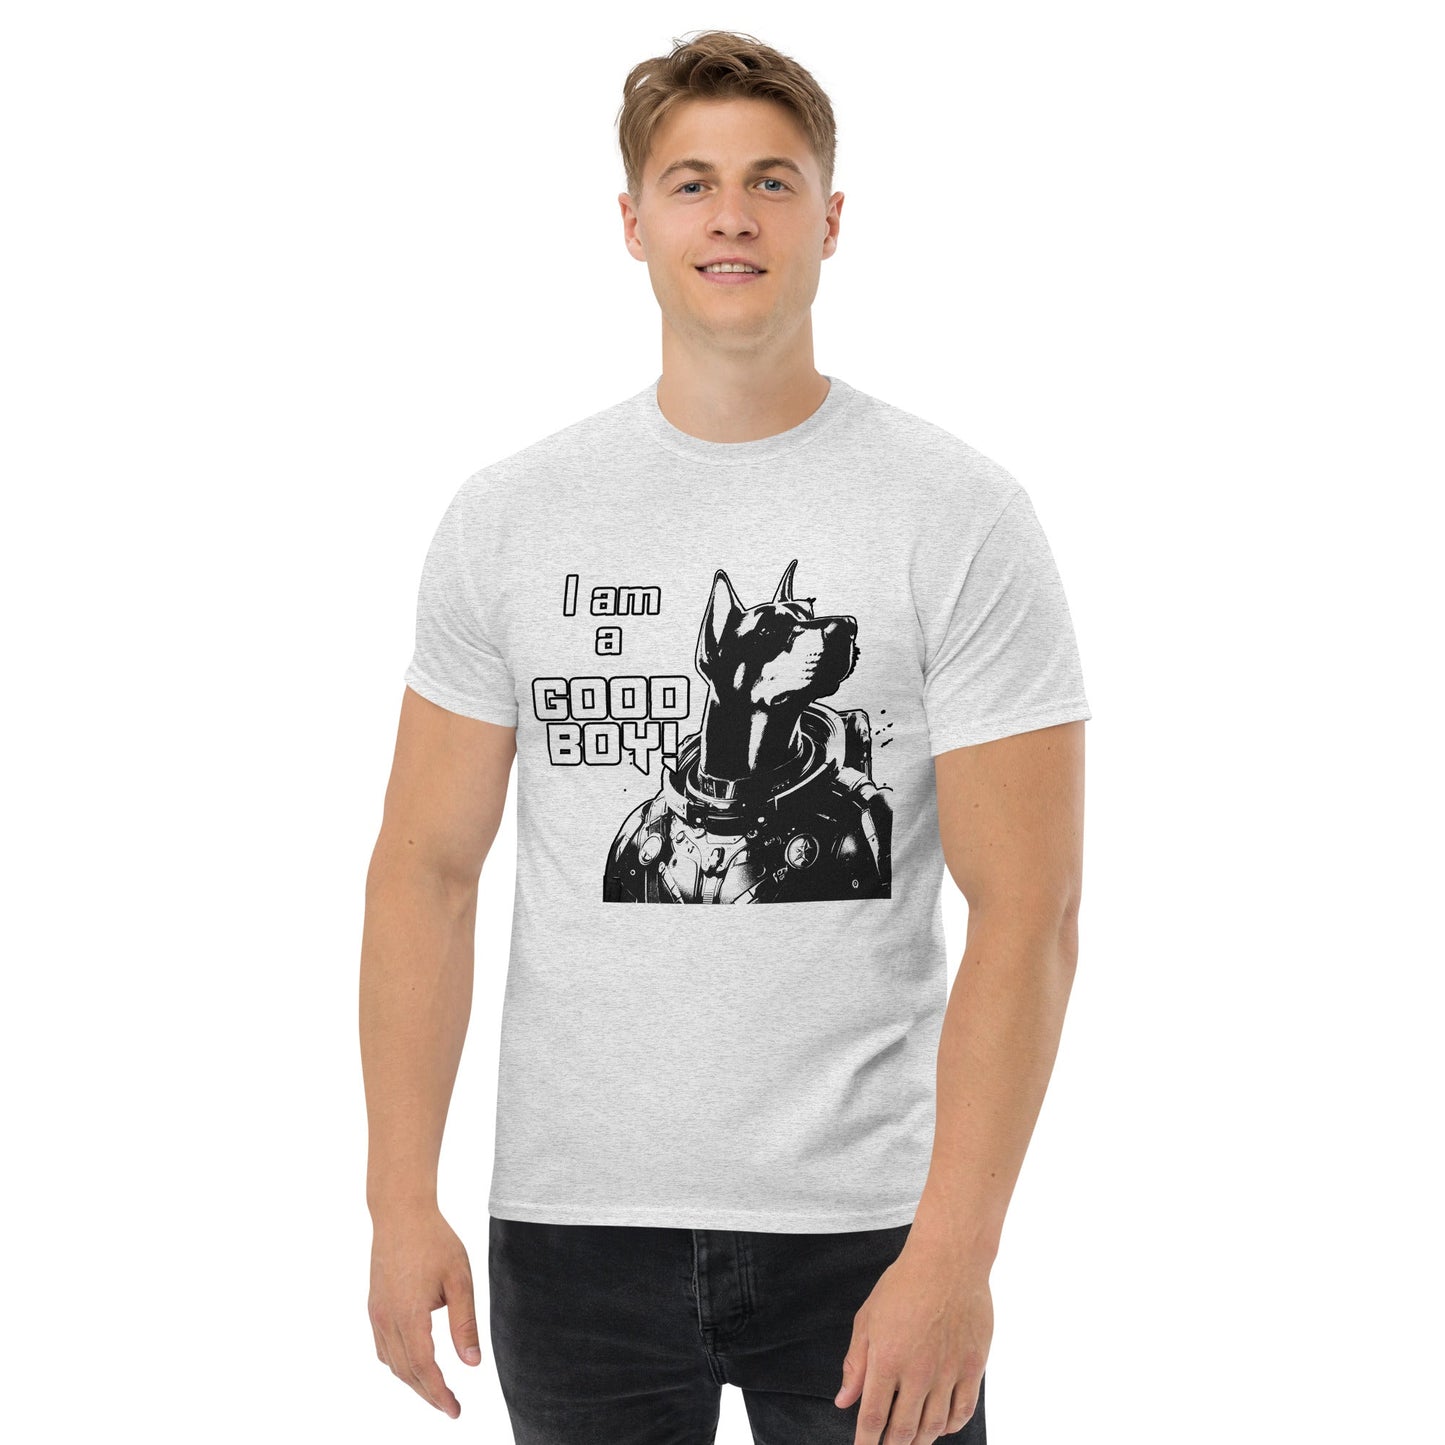 I Am a Good Boy Men's Classic Tee (Light) - Join General Major in Saving the Galaxy! - Spectral Ink Shop - T-Shirt -6203244_14973